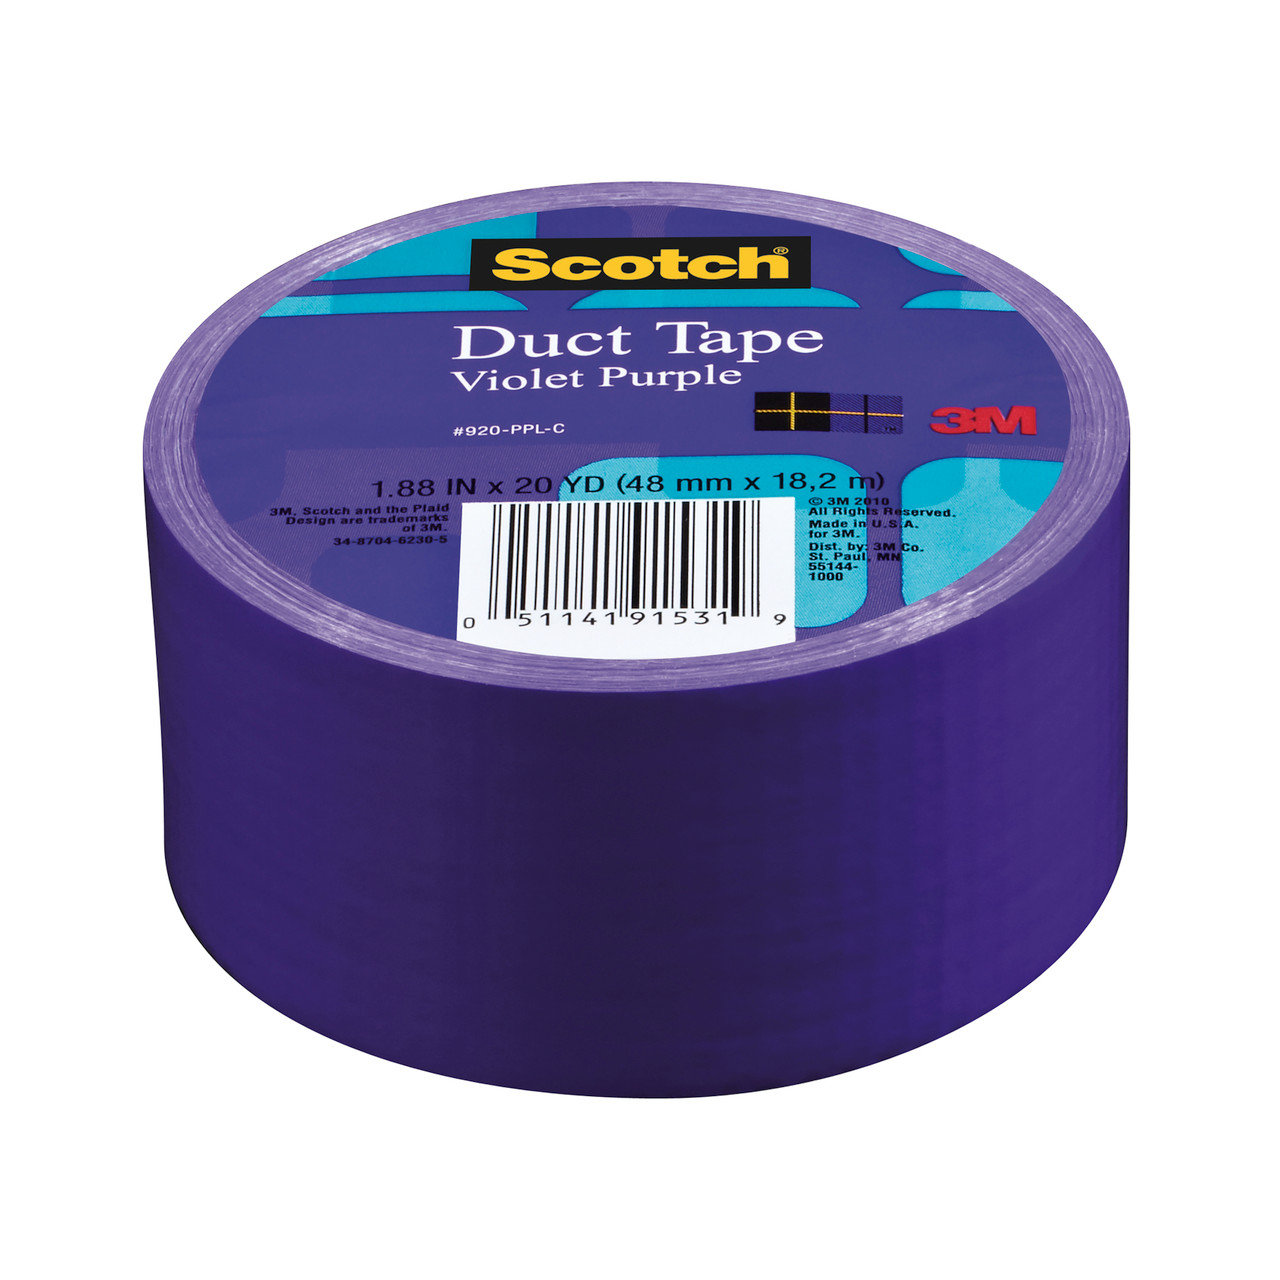 20 NEW Duct Tape Patterns!!!! 